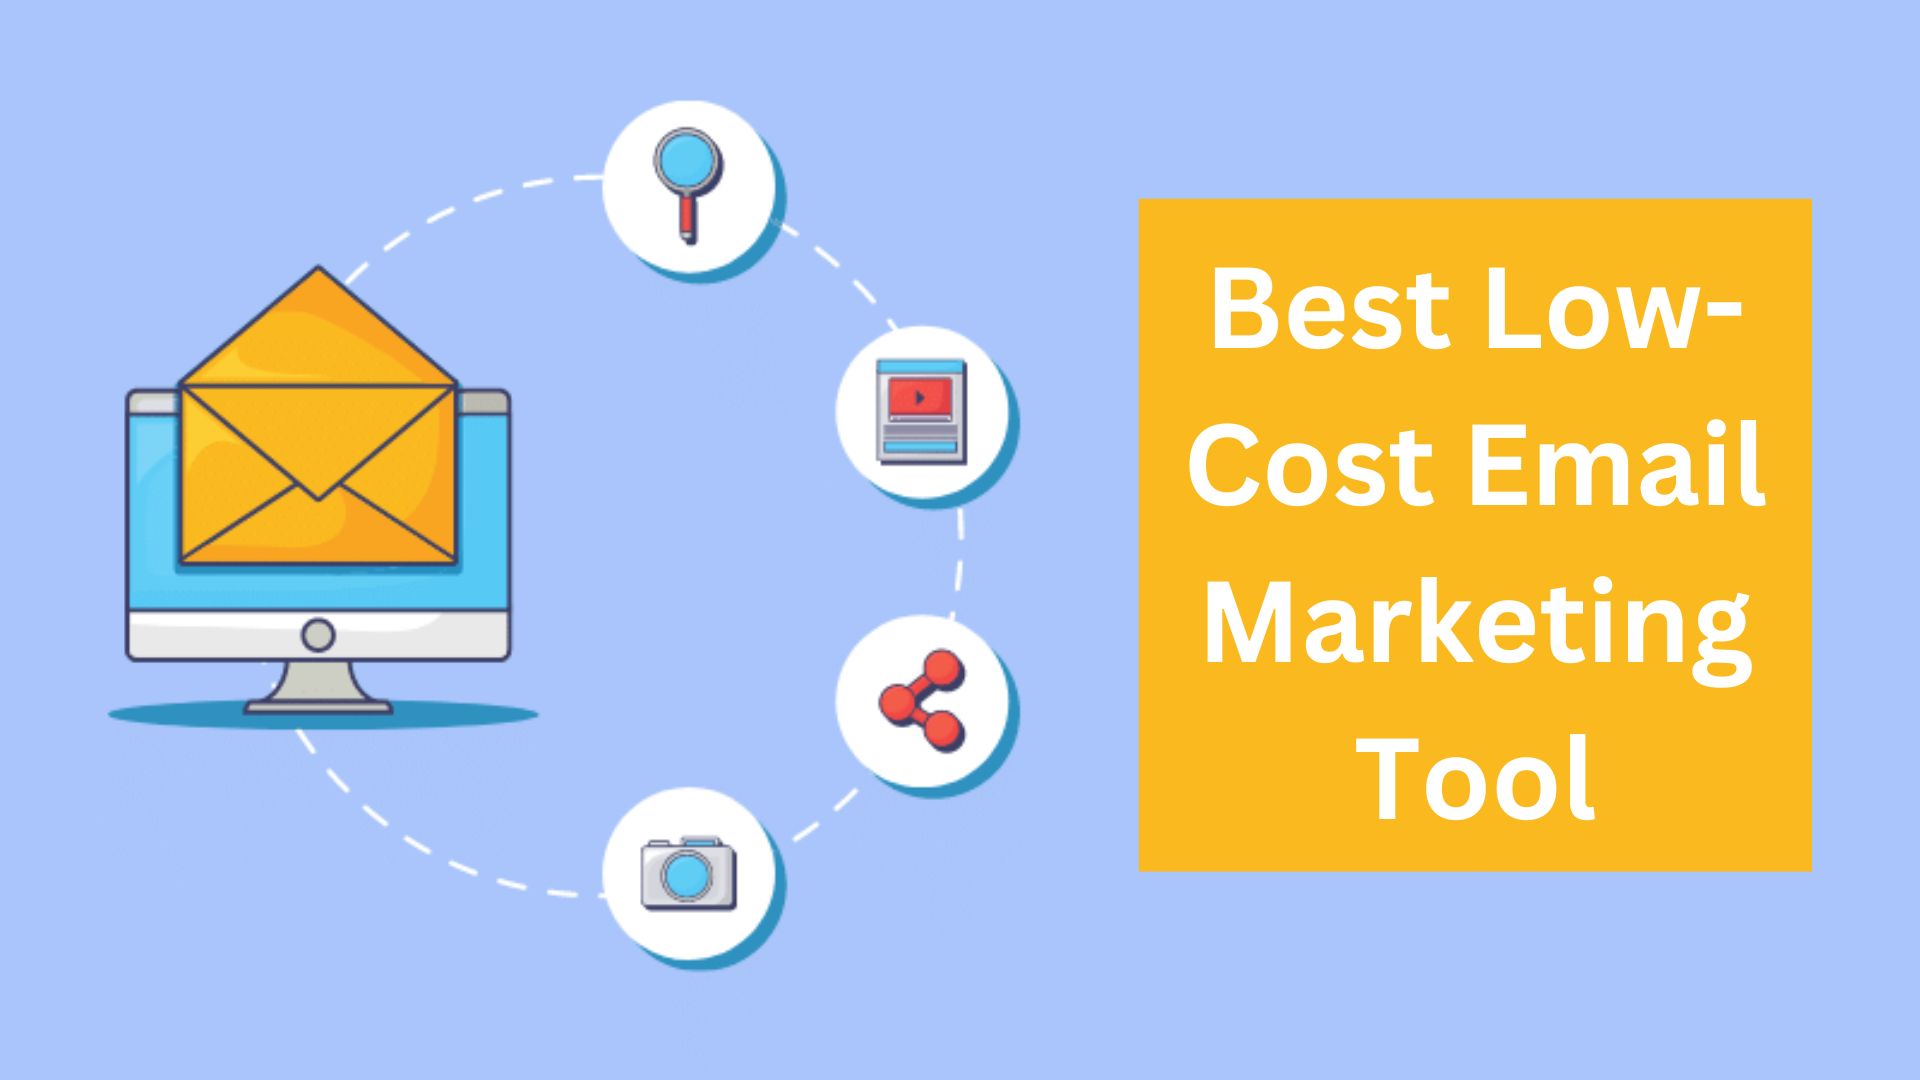 Best Low-Cost Email Marketing Tool